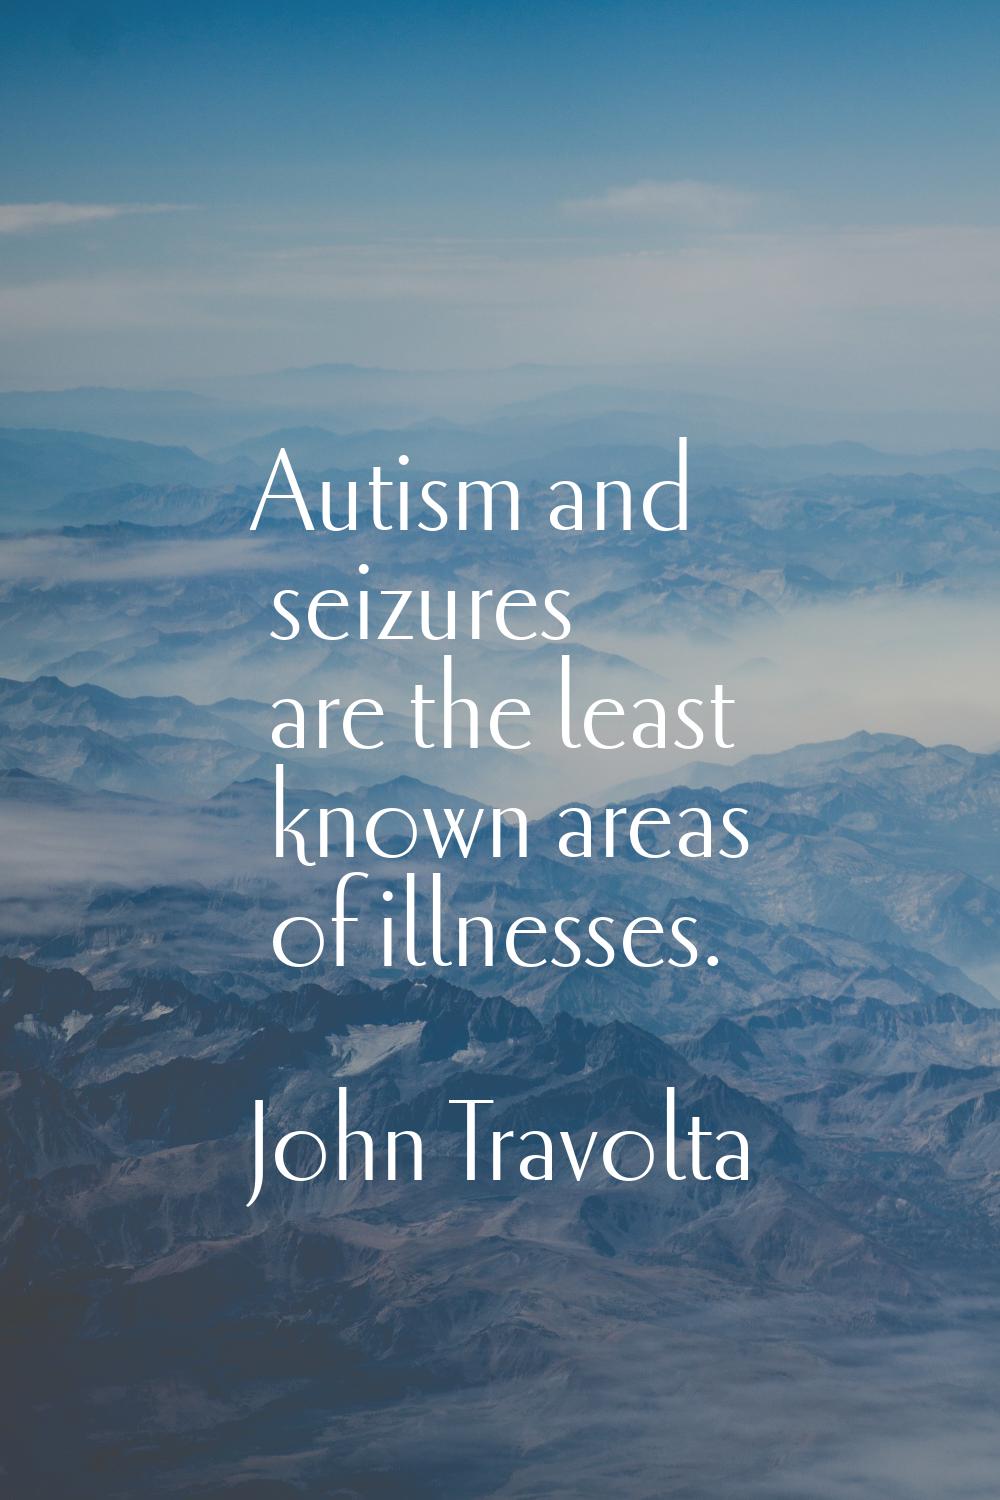 Autism and seizures are the least known areas of illnesses.